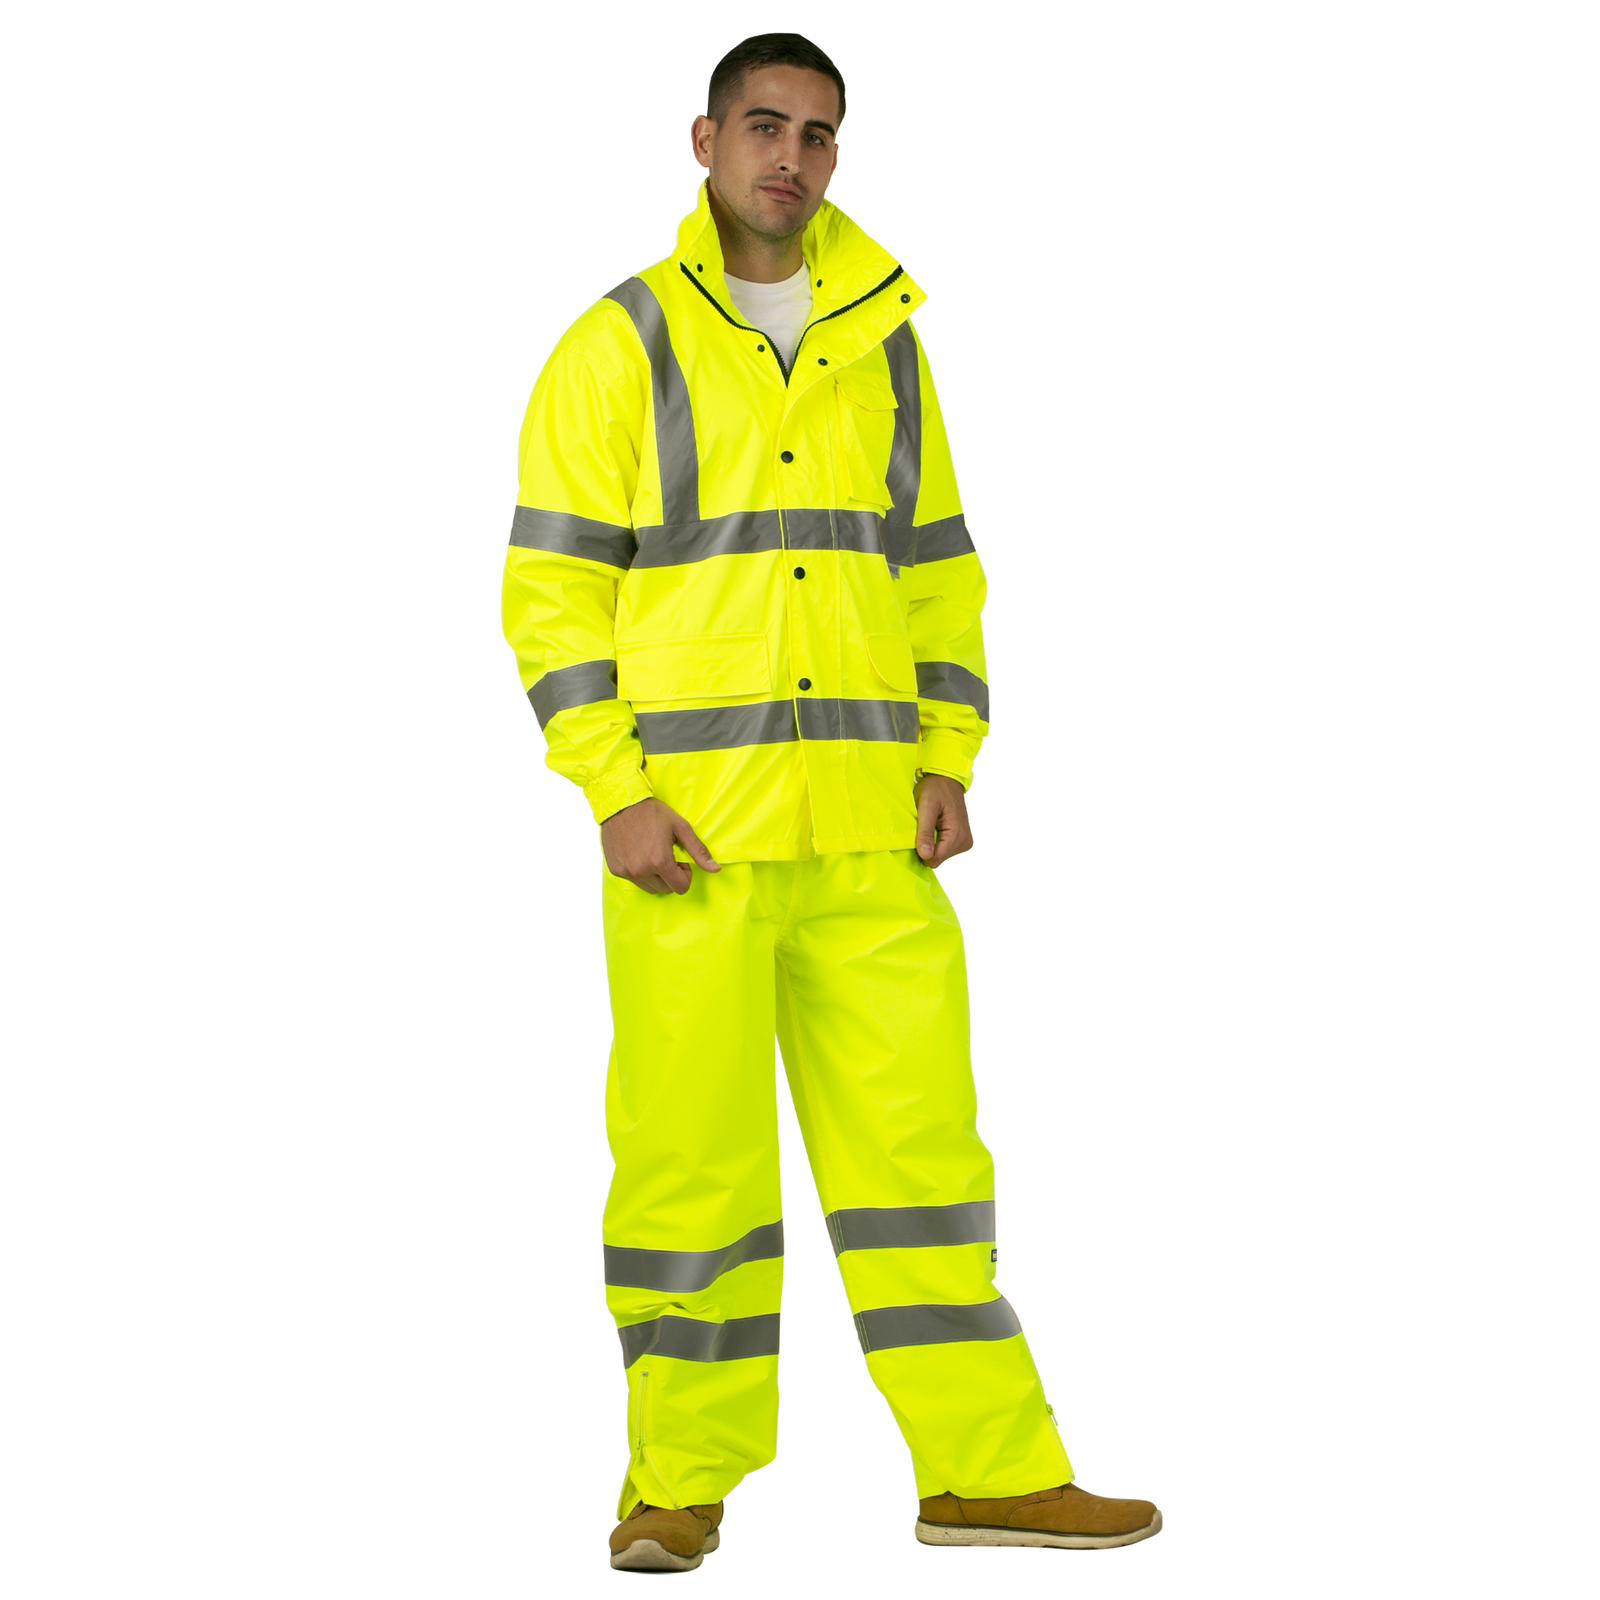 Worker wearing the all yellow high visibility JORESTECH® rain set with 2 inch reflective strips